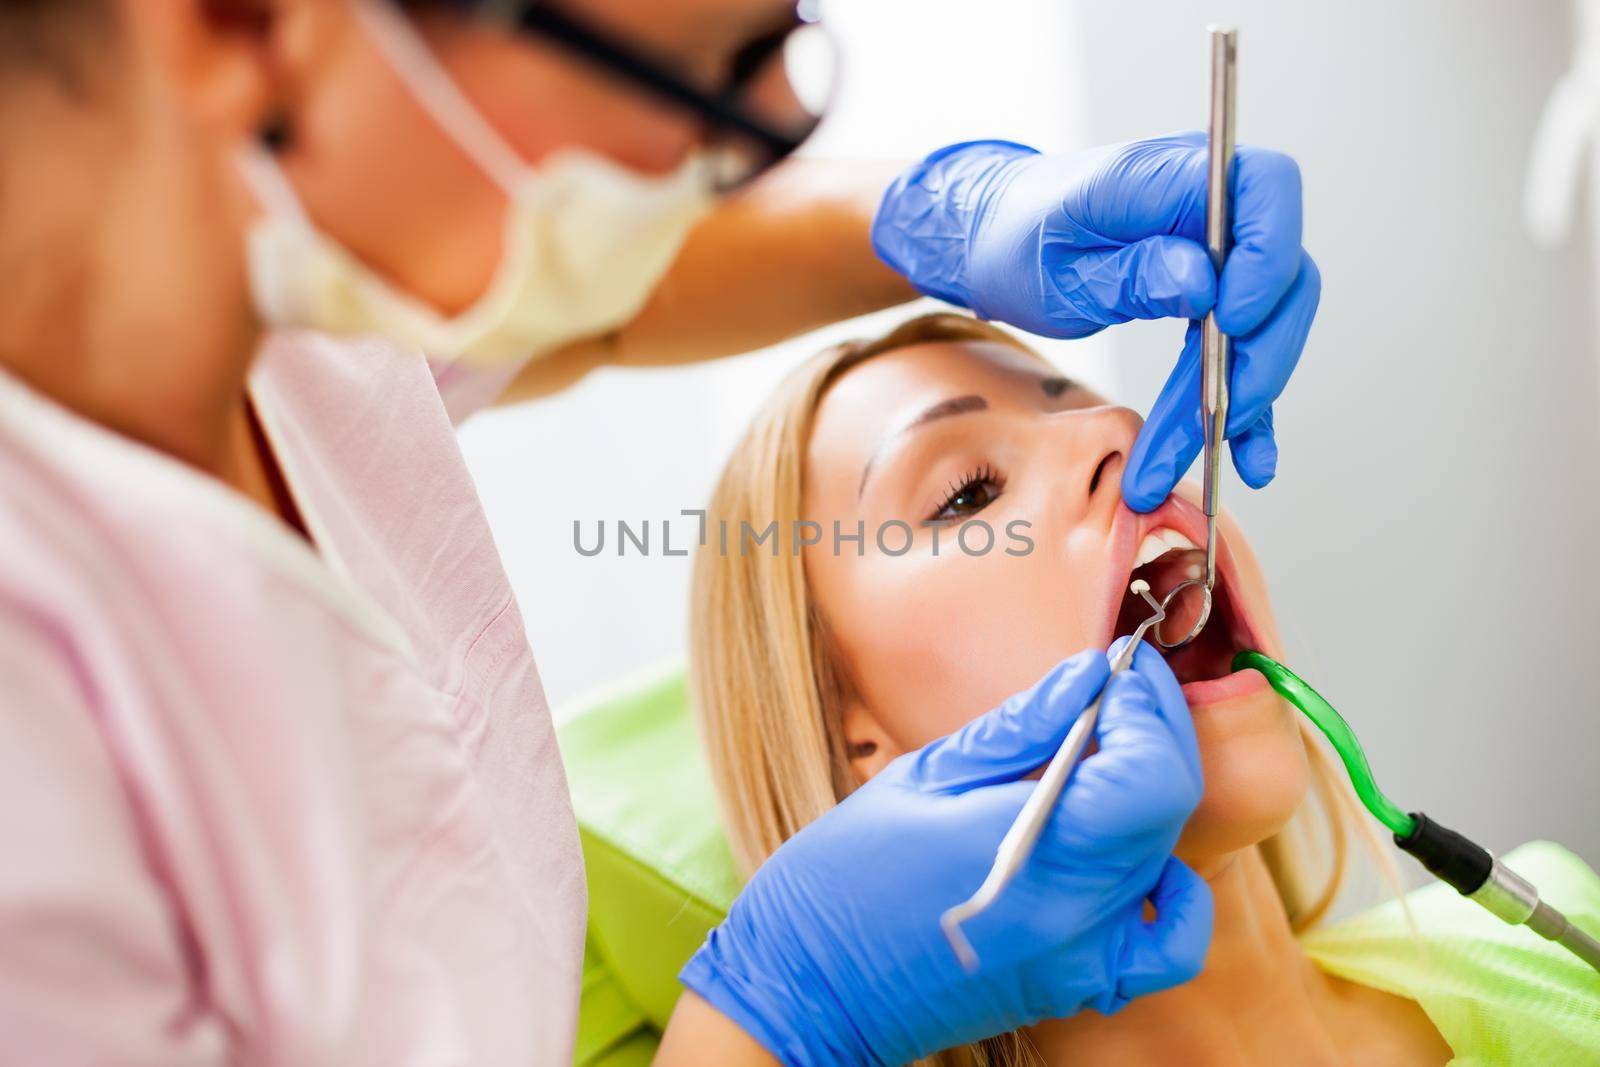 Young woman at dentist. Dentist is examining her teeth.